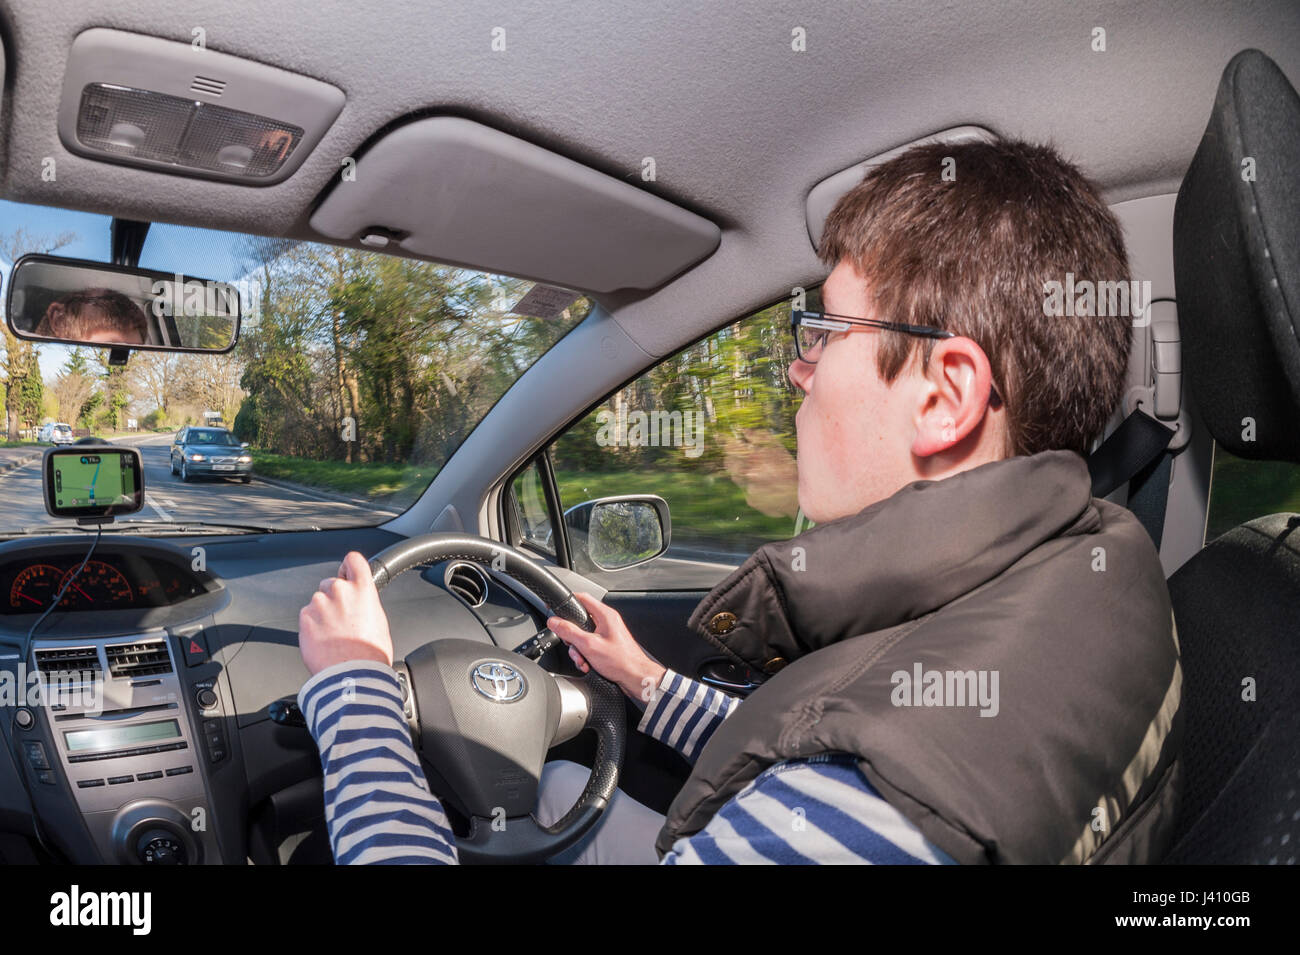 A Model Released 17 year old boy learning to drive in the Uk Stock Photo